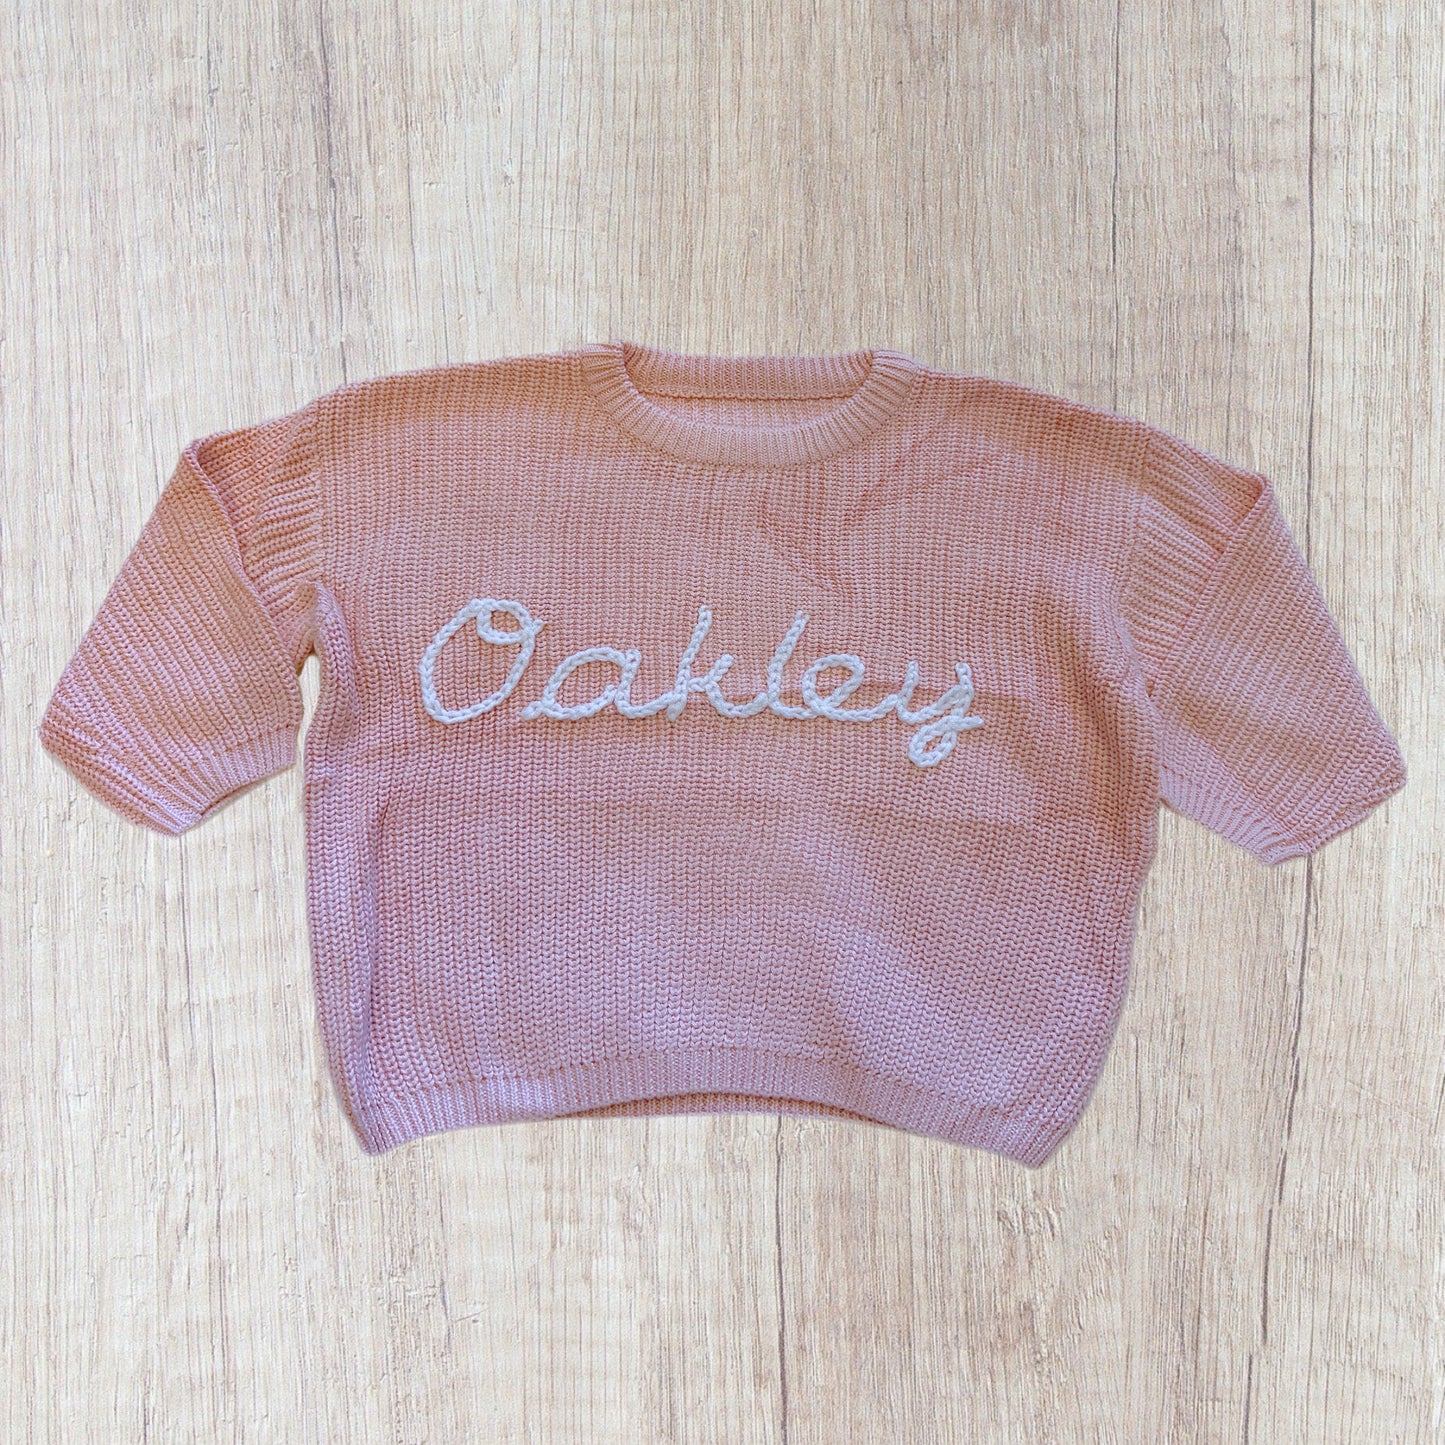 18/24 Pink Chunky Sweater “Oakley” With Imperfection (RTS)